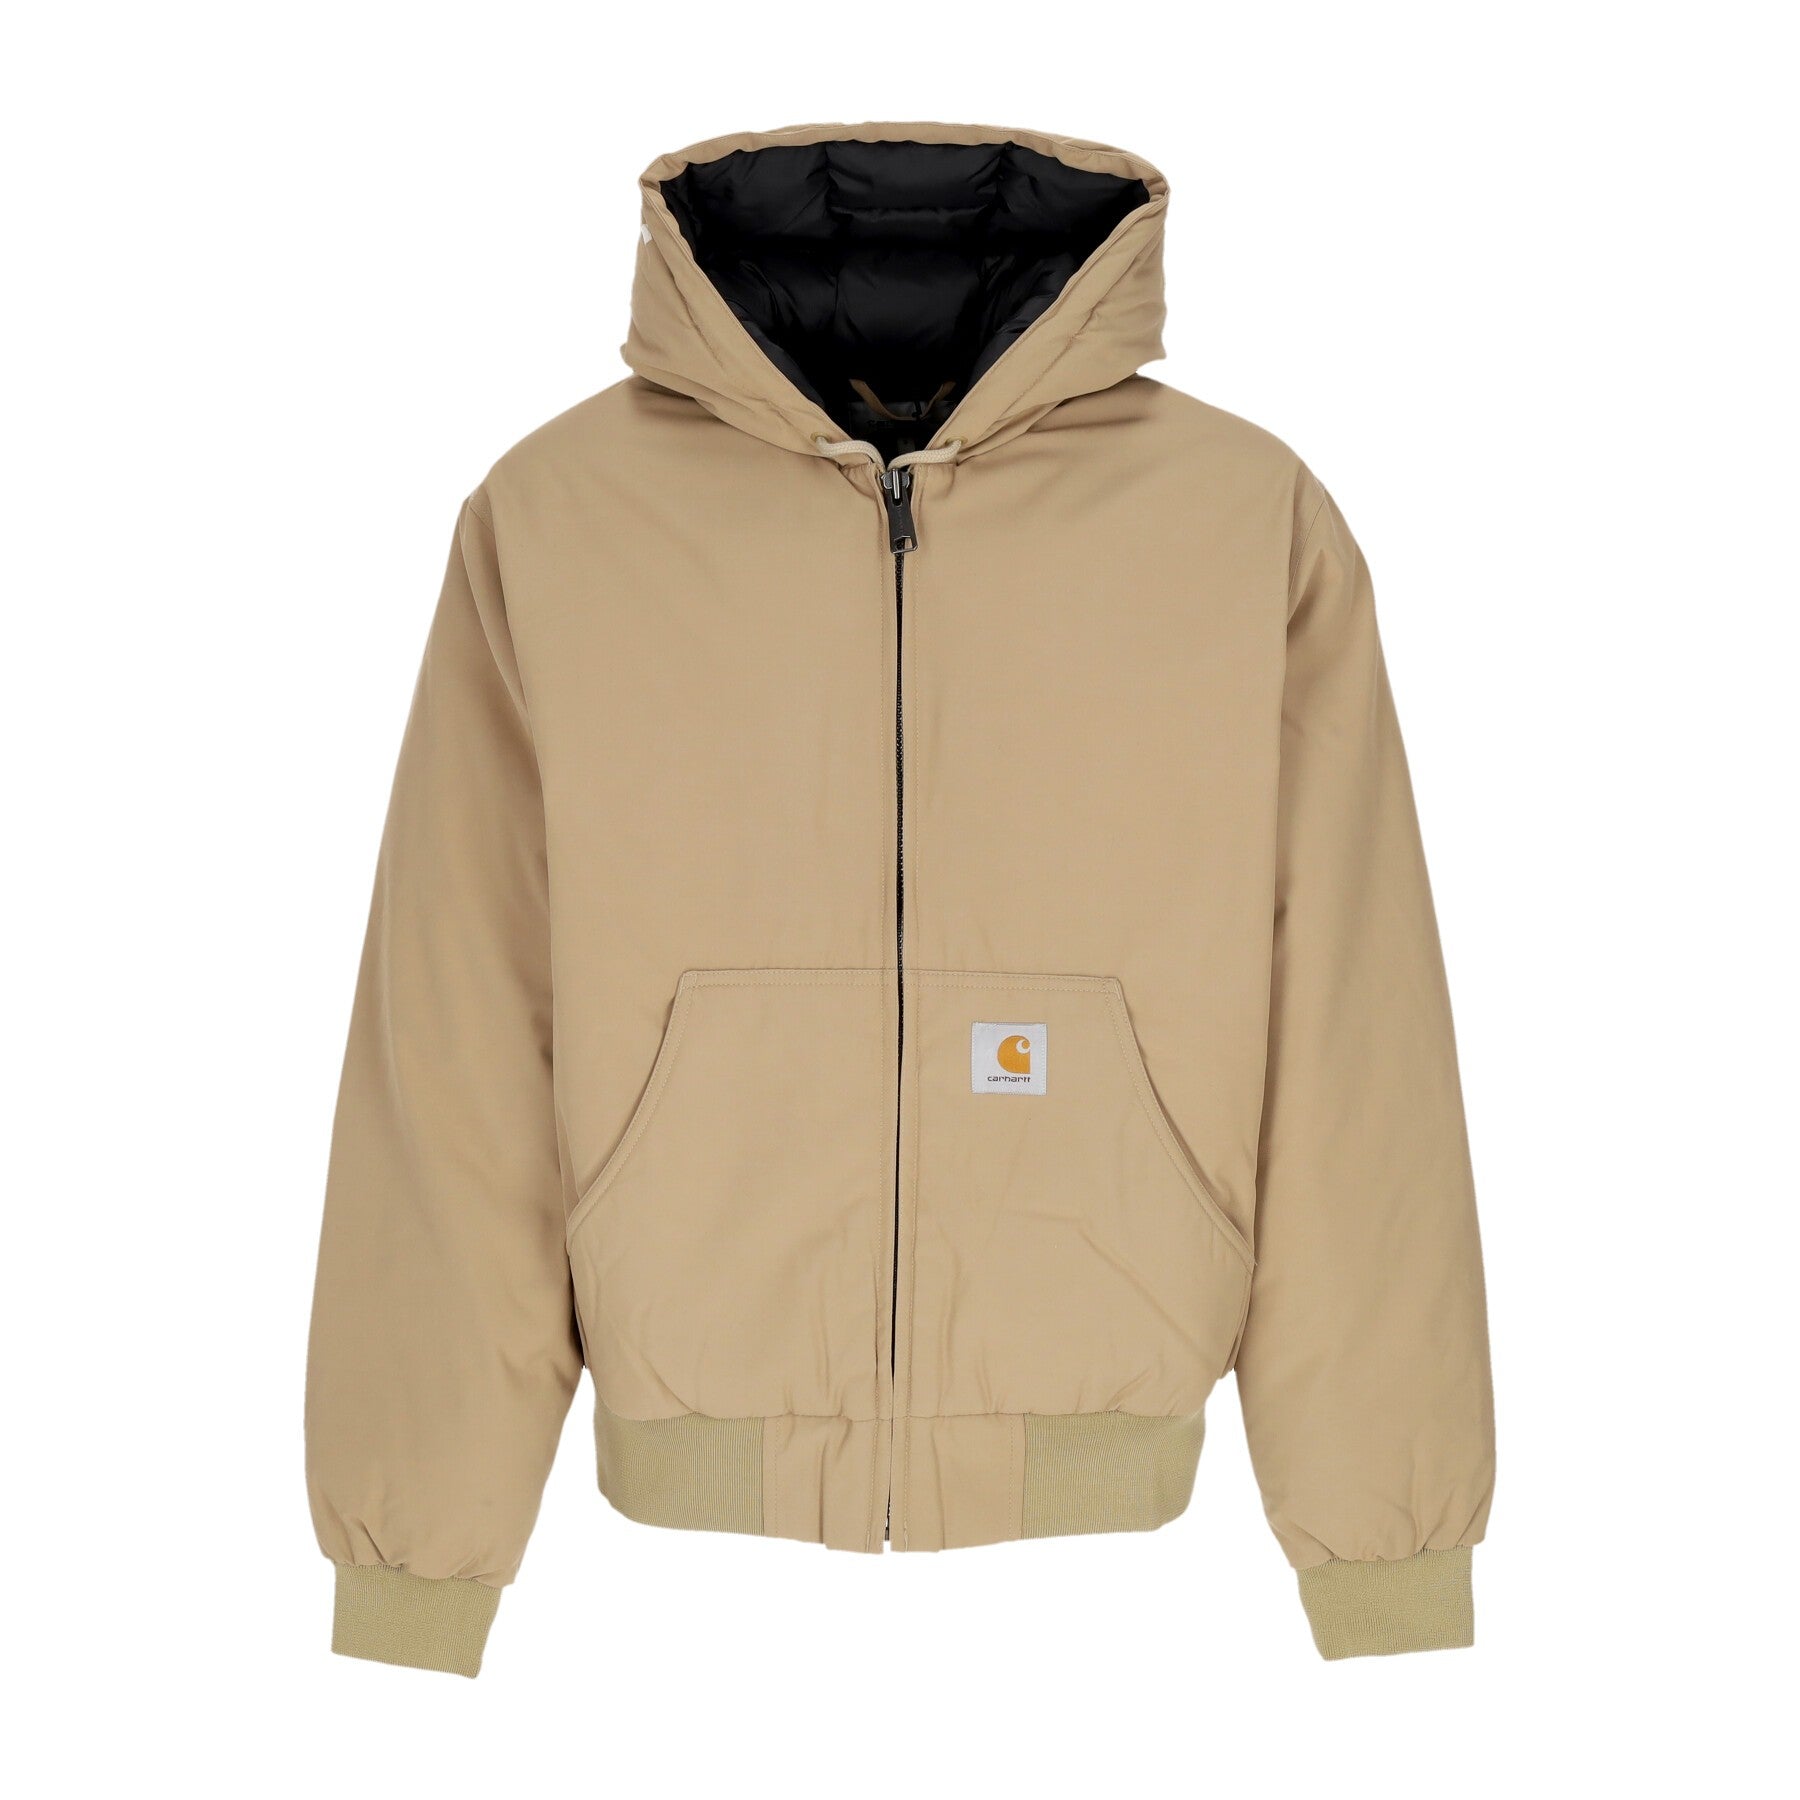 Carhartt Wip, Giubbotto Uomo Active Cold Jacket, Leather